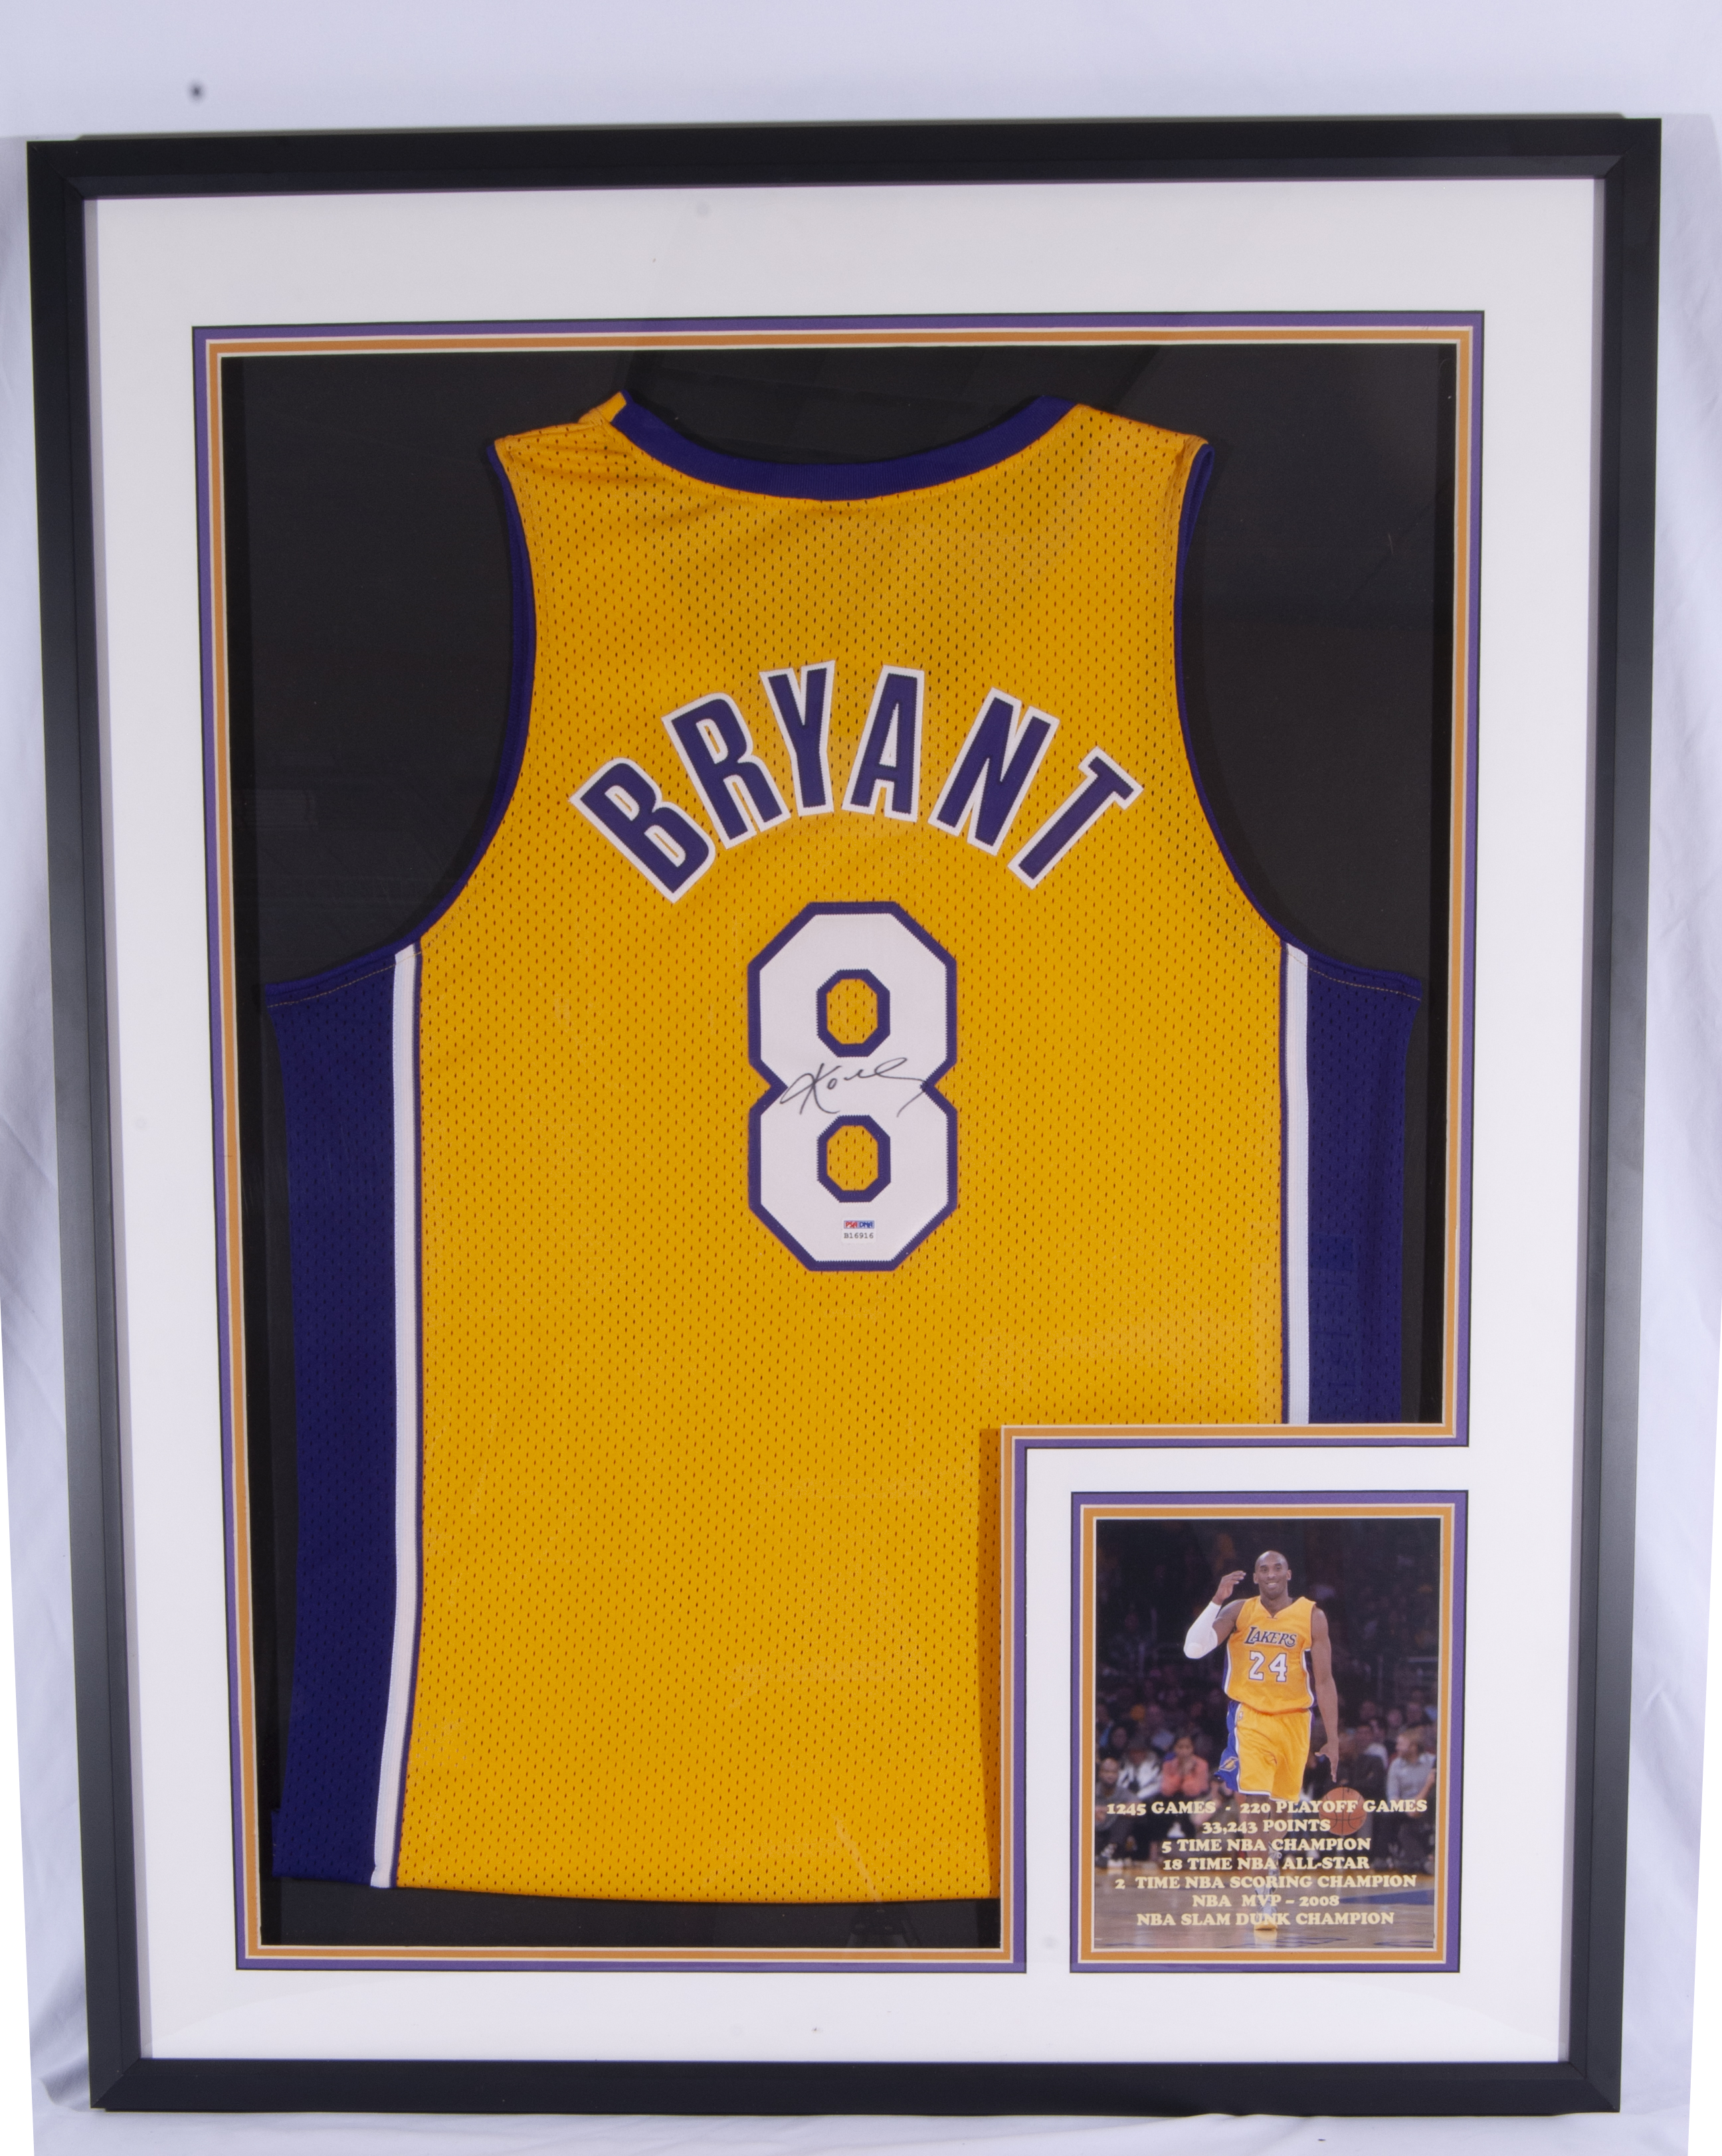 Autographed Kobe Bryant Photo - #8 Jersey Number framed PSA 8 exclusive